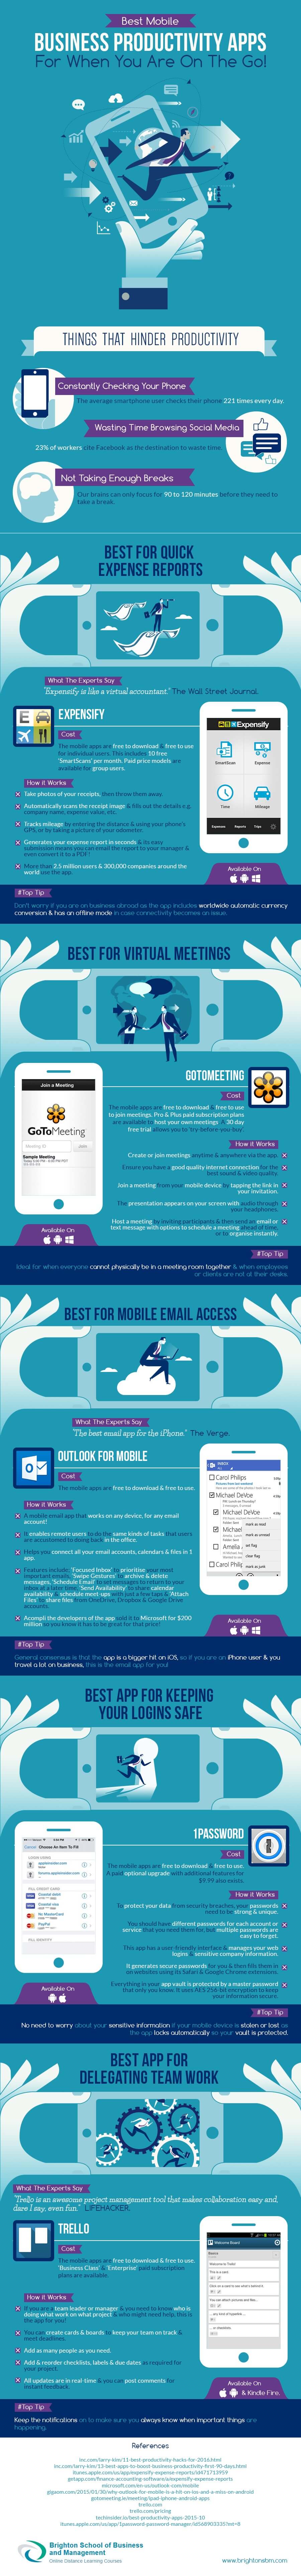 best-mobile-business-productivity-apps-infographic-plaza